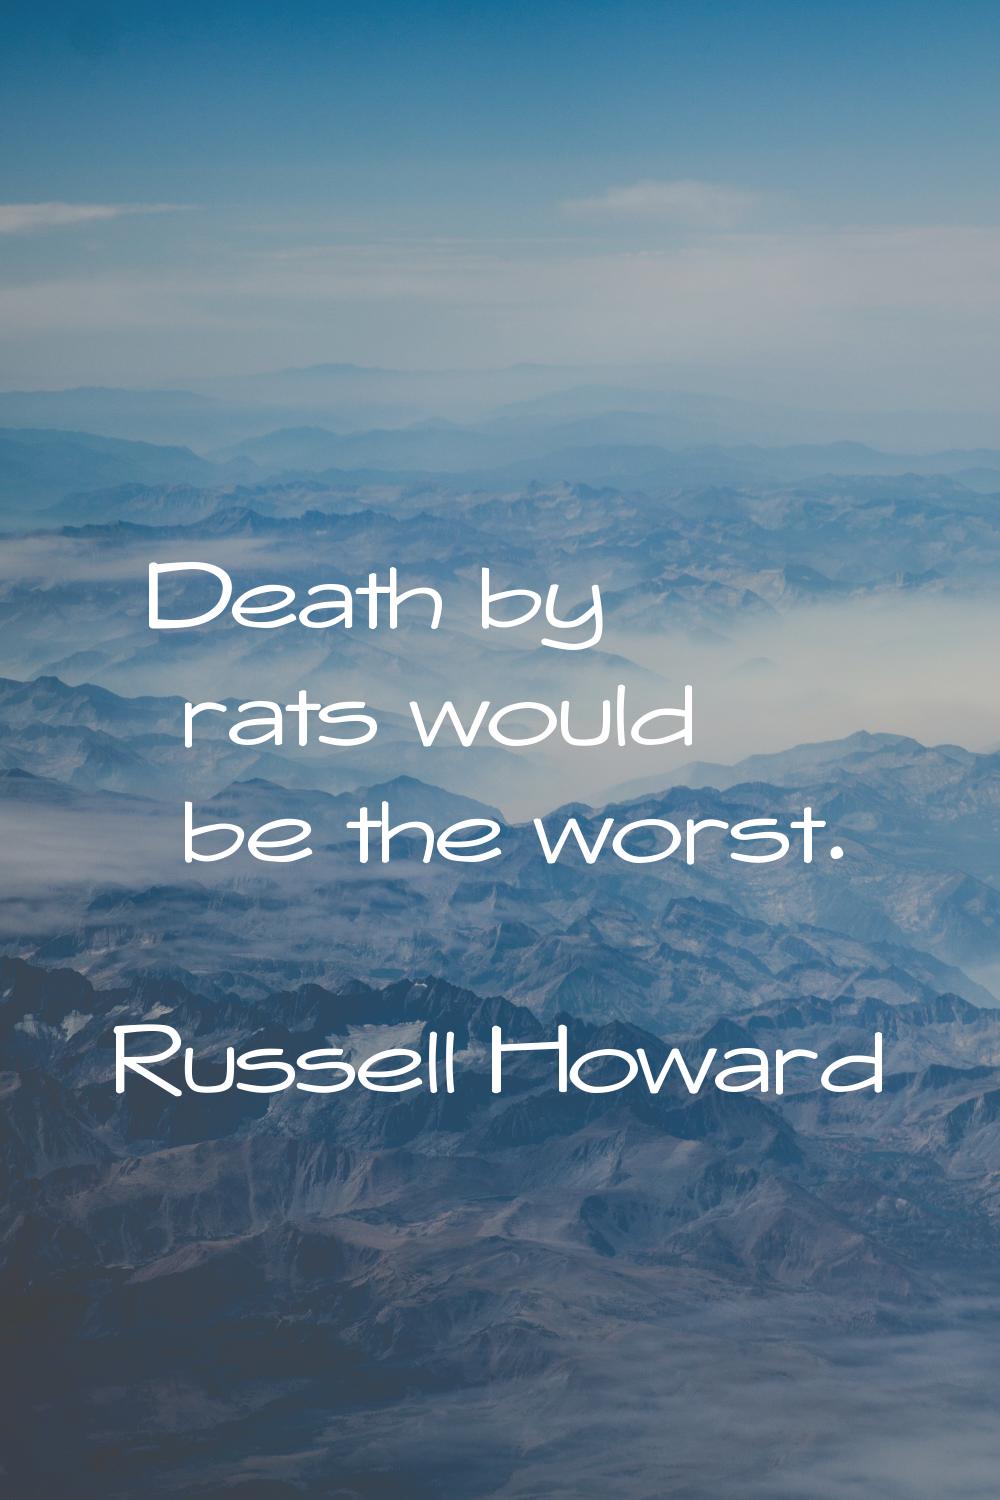 Death by rats would be the worst.